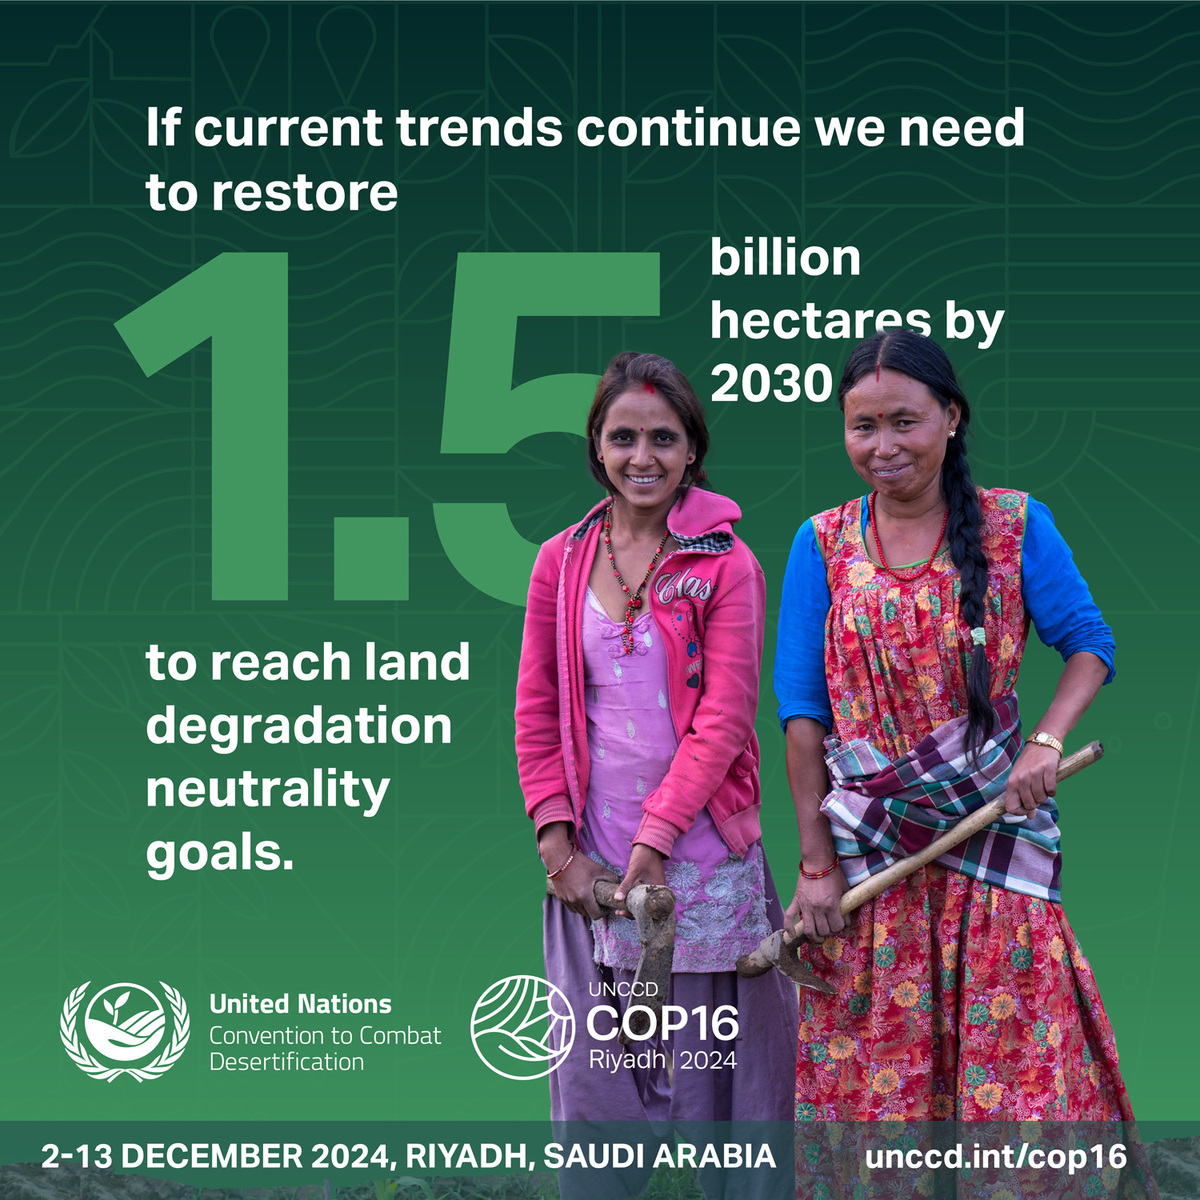 As we approach #UNCCDCOP16 in Riyadh, let's remember the critical goal ahead of us: to restore 1.5 billion hectares by 2030 to ensure a sustainable future. Achieving this goal will: 

- Combat land degradation
- Promote biodiversity
- Increase climate resilience

#UNited4Land